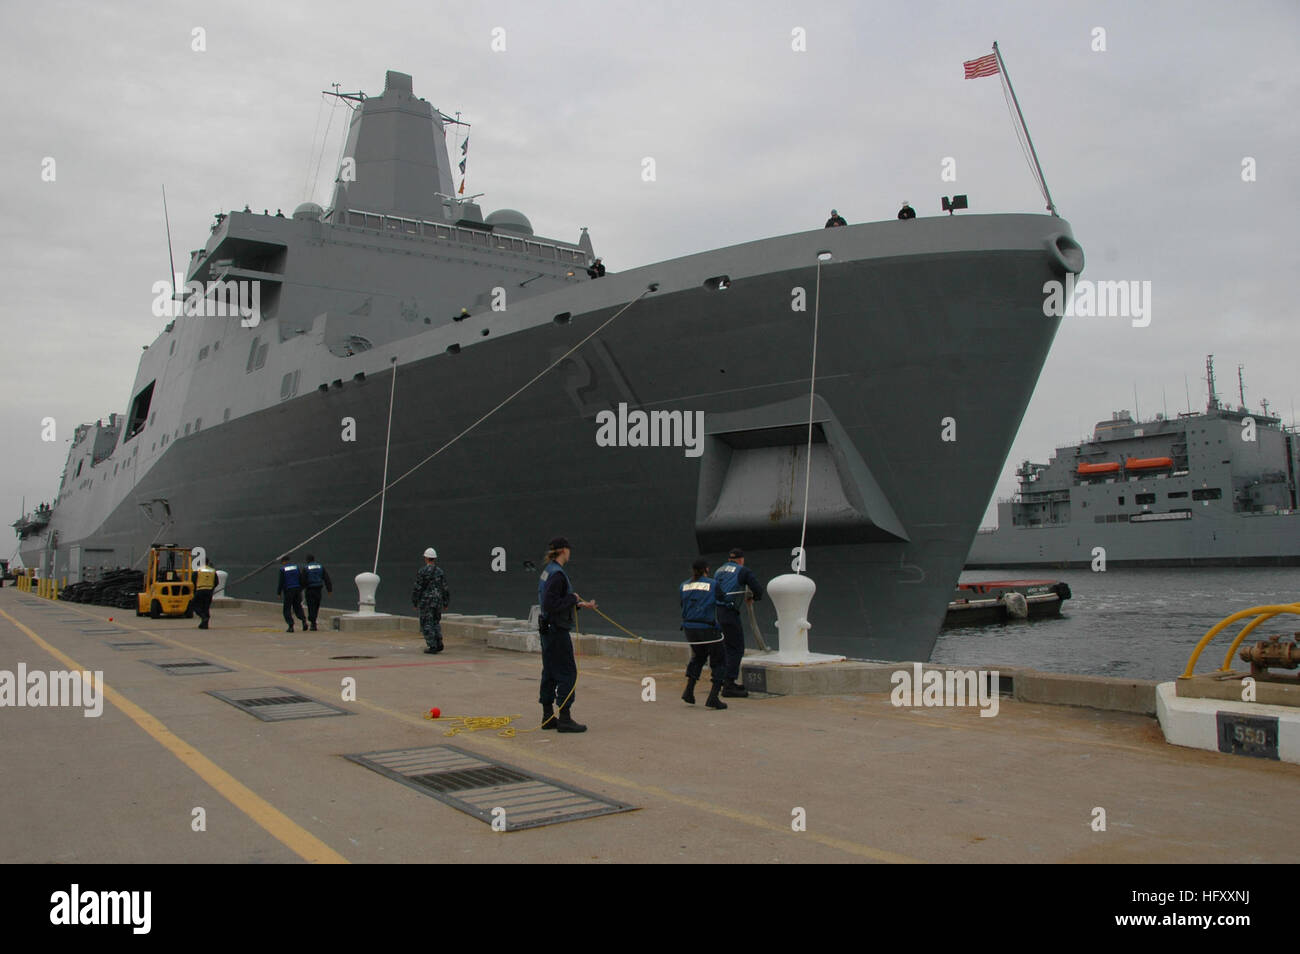 091118-N-9806M-003 NORFOLK (Nov. 18, 2009) The amphibious transport dock ship USS New York (LPD 21) arrives at its homeport of Naval Station Norfolk for the first time since it was commissioned Nov. 7. New York will be used for amphibious assault, special operations, expeditionary warfare missions, and humanitarian support around the world. (U.S. Navy photo by Mass Communication Specialist 2nd Class Rafael Martie/Released) US Navy 091118-N-9806M-003 USS New York (LPD 21) arrives at its homeport of Naval Station Norfolk Stock Photo